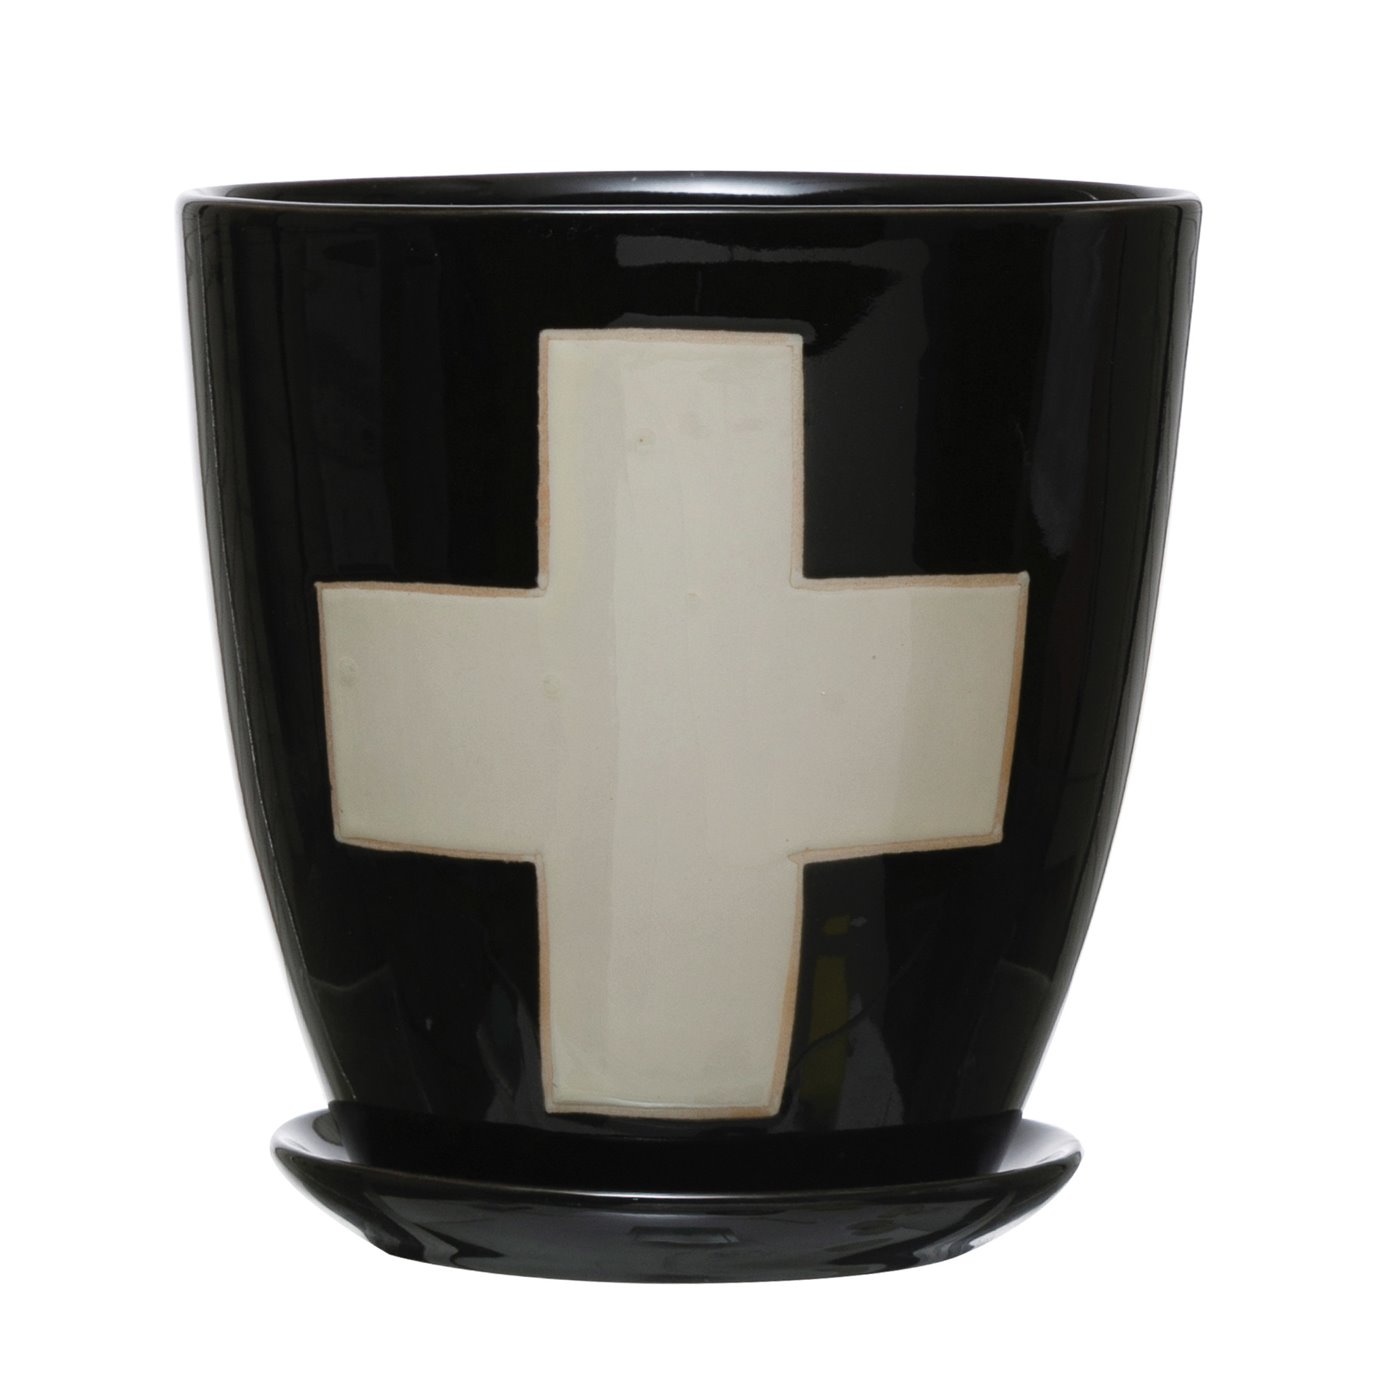 Stoneware Planter with Saucer & Wax Relief White Swiss Cross, Black, Set of 2 (Holds 4" Pot) (Each One Will Vary)